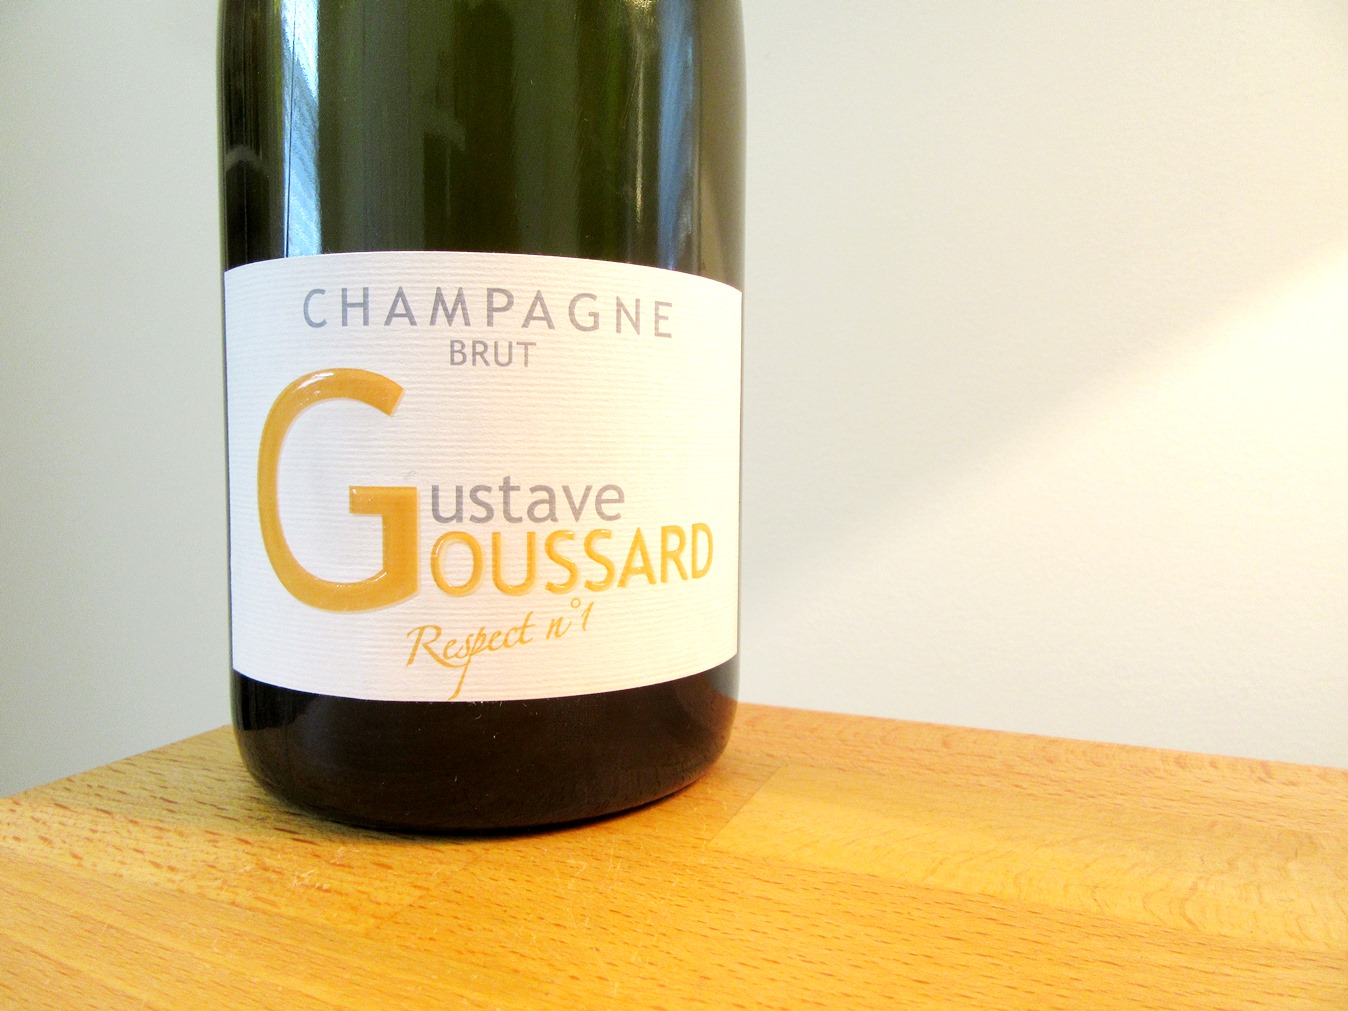 Gustave Goussard, Respect n°1 Brut Champagne, France, Wine Casual